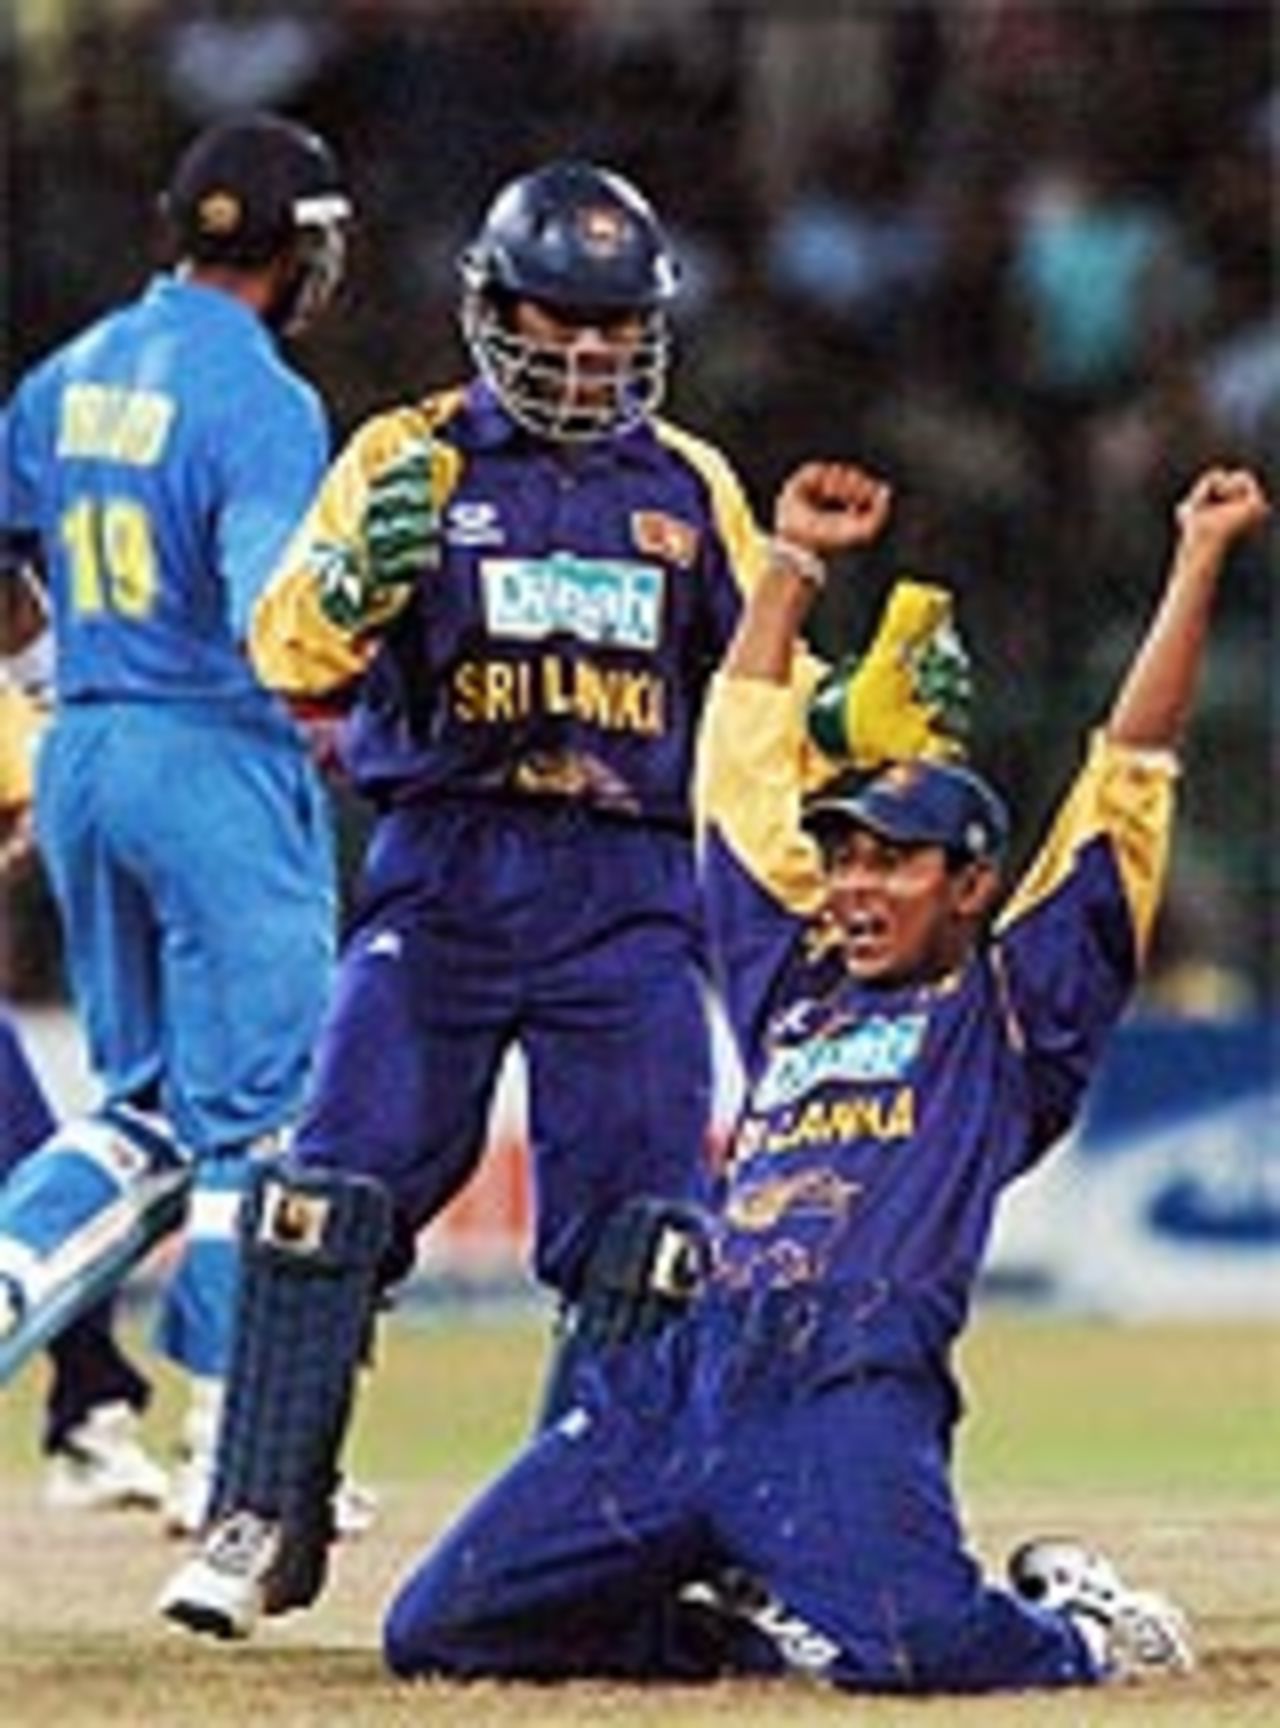 Dilshan Tillakaratne celebrates a spectacular catch, that had accounted for Rahul Dravid, Sri Lanka v India, Final, Asia Cup, August 1, 2004